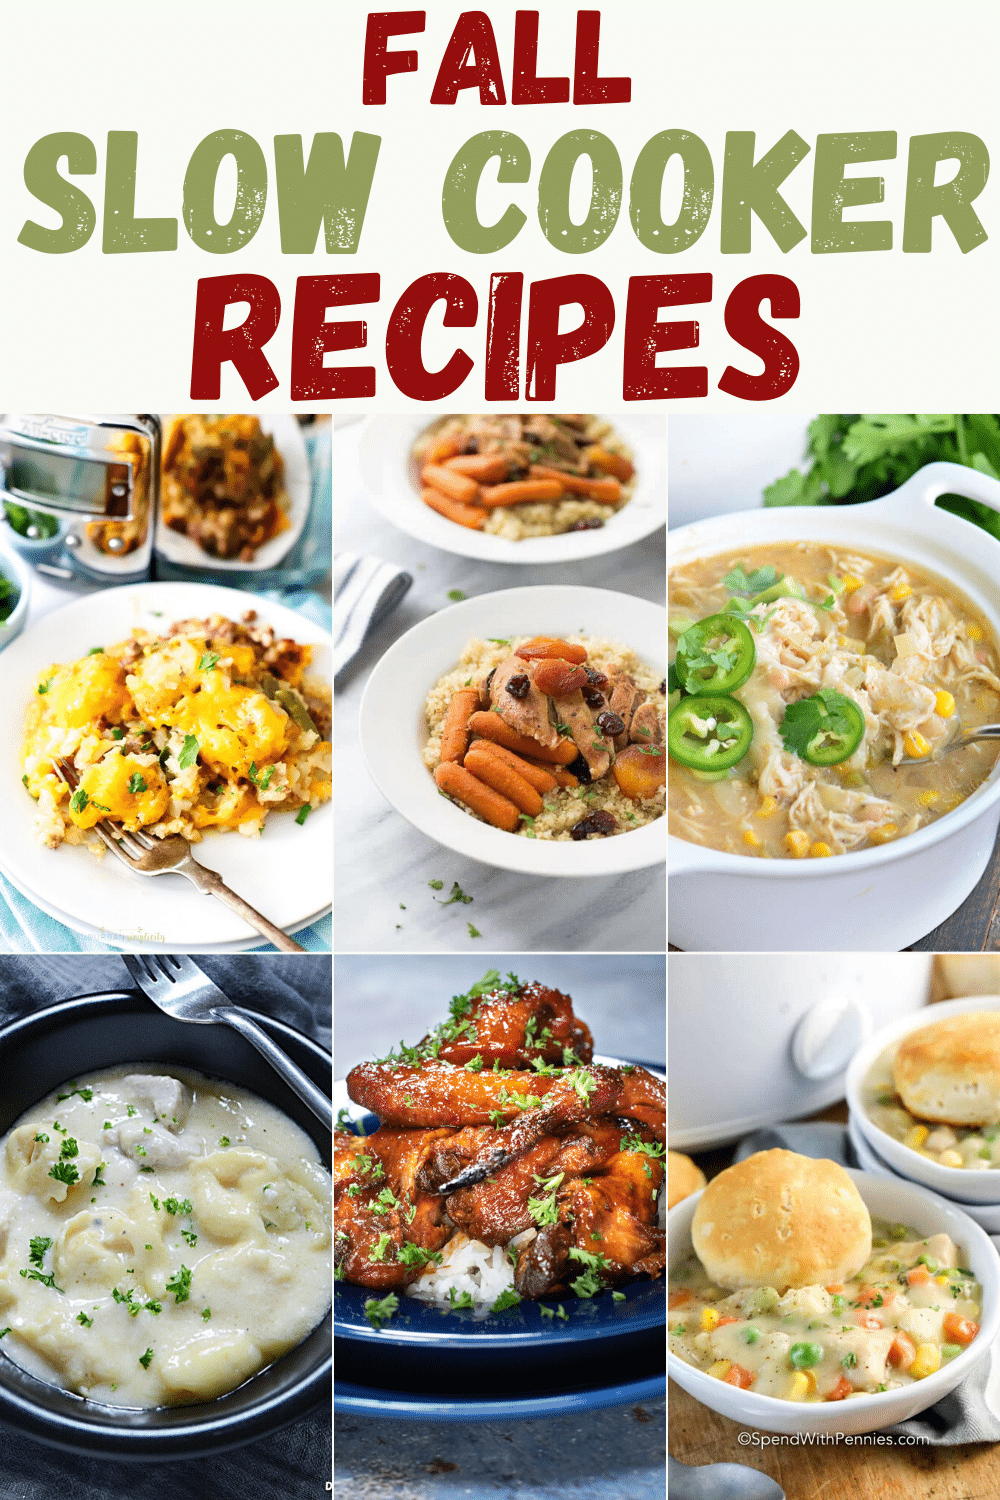 Fall Slow Cooker Recipes - Mom. Wife. Busy Life.